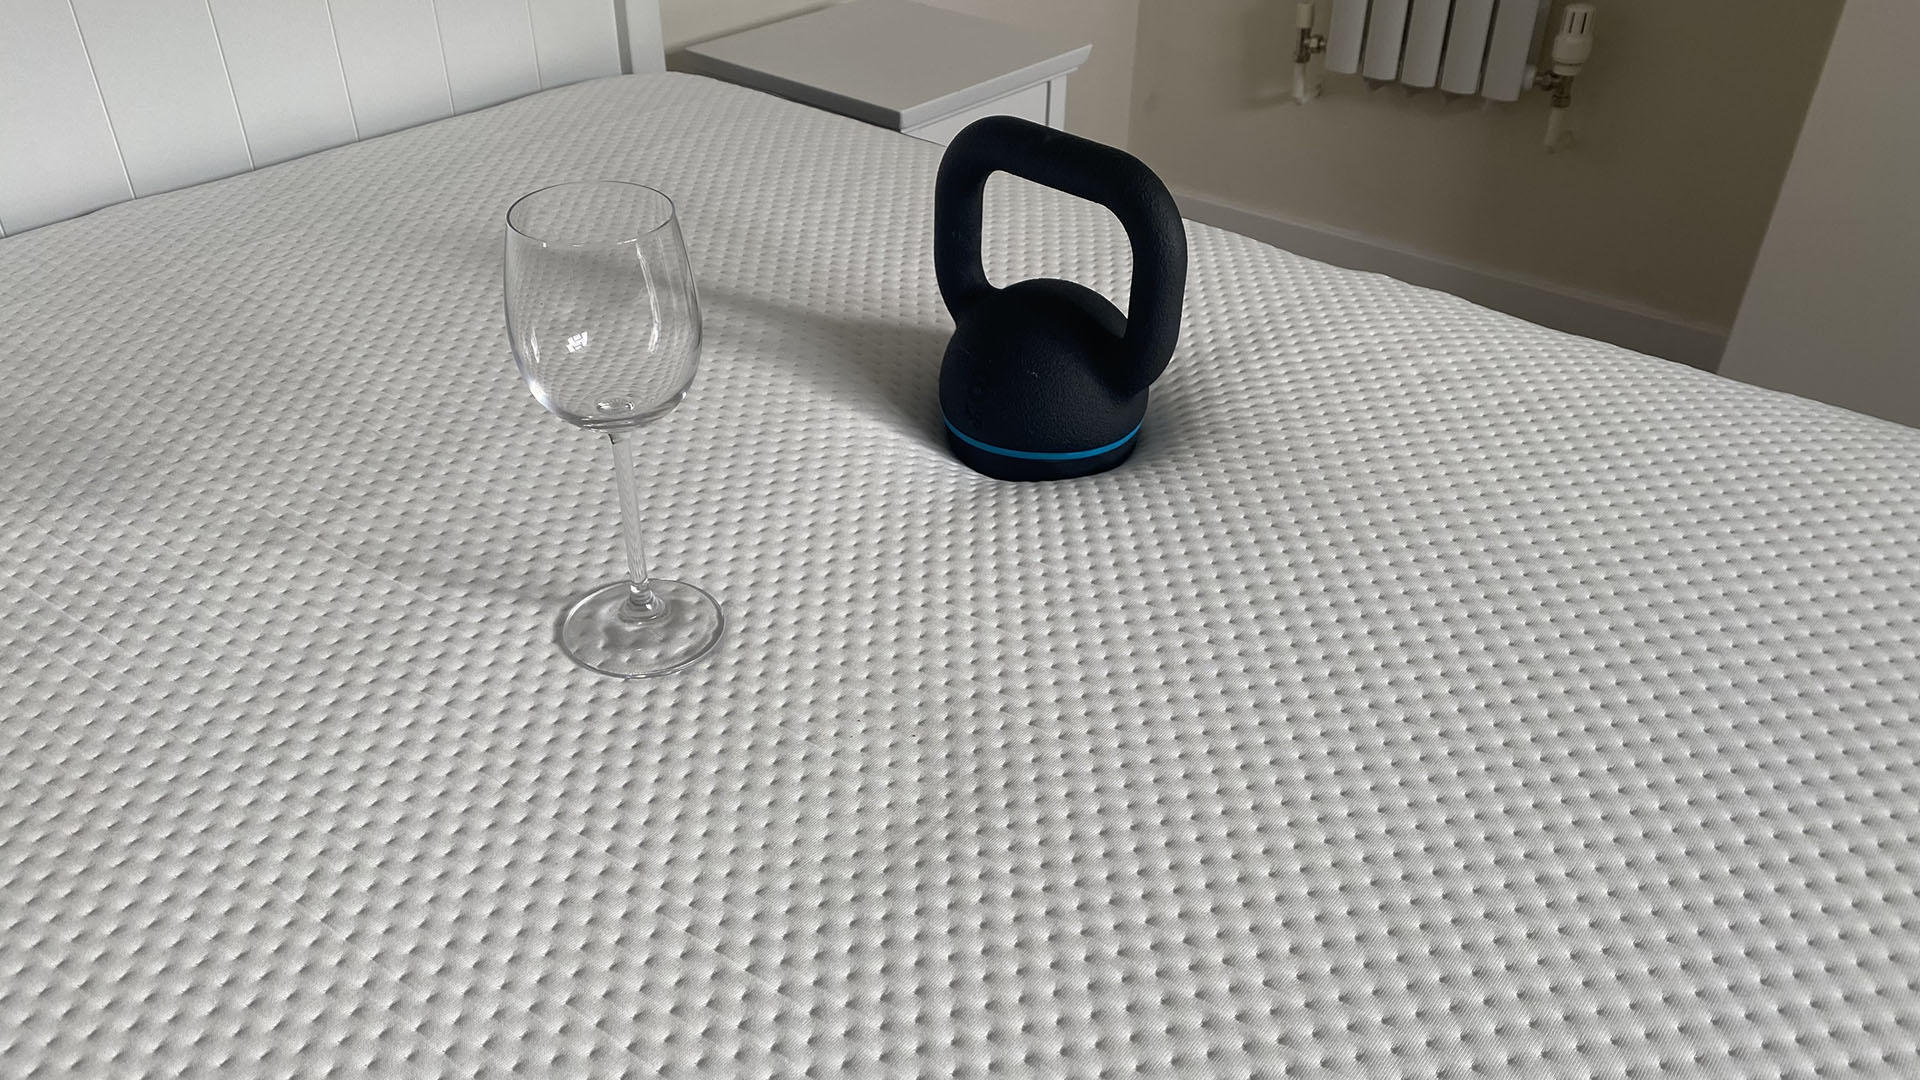 Otty Original Hybrid mattress with a weight and a wine glass on it